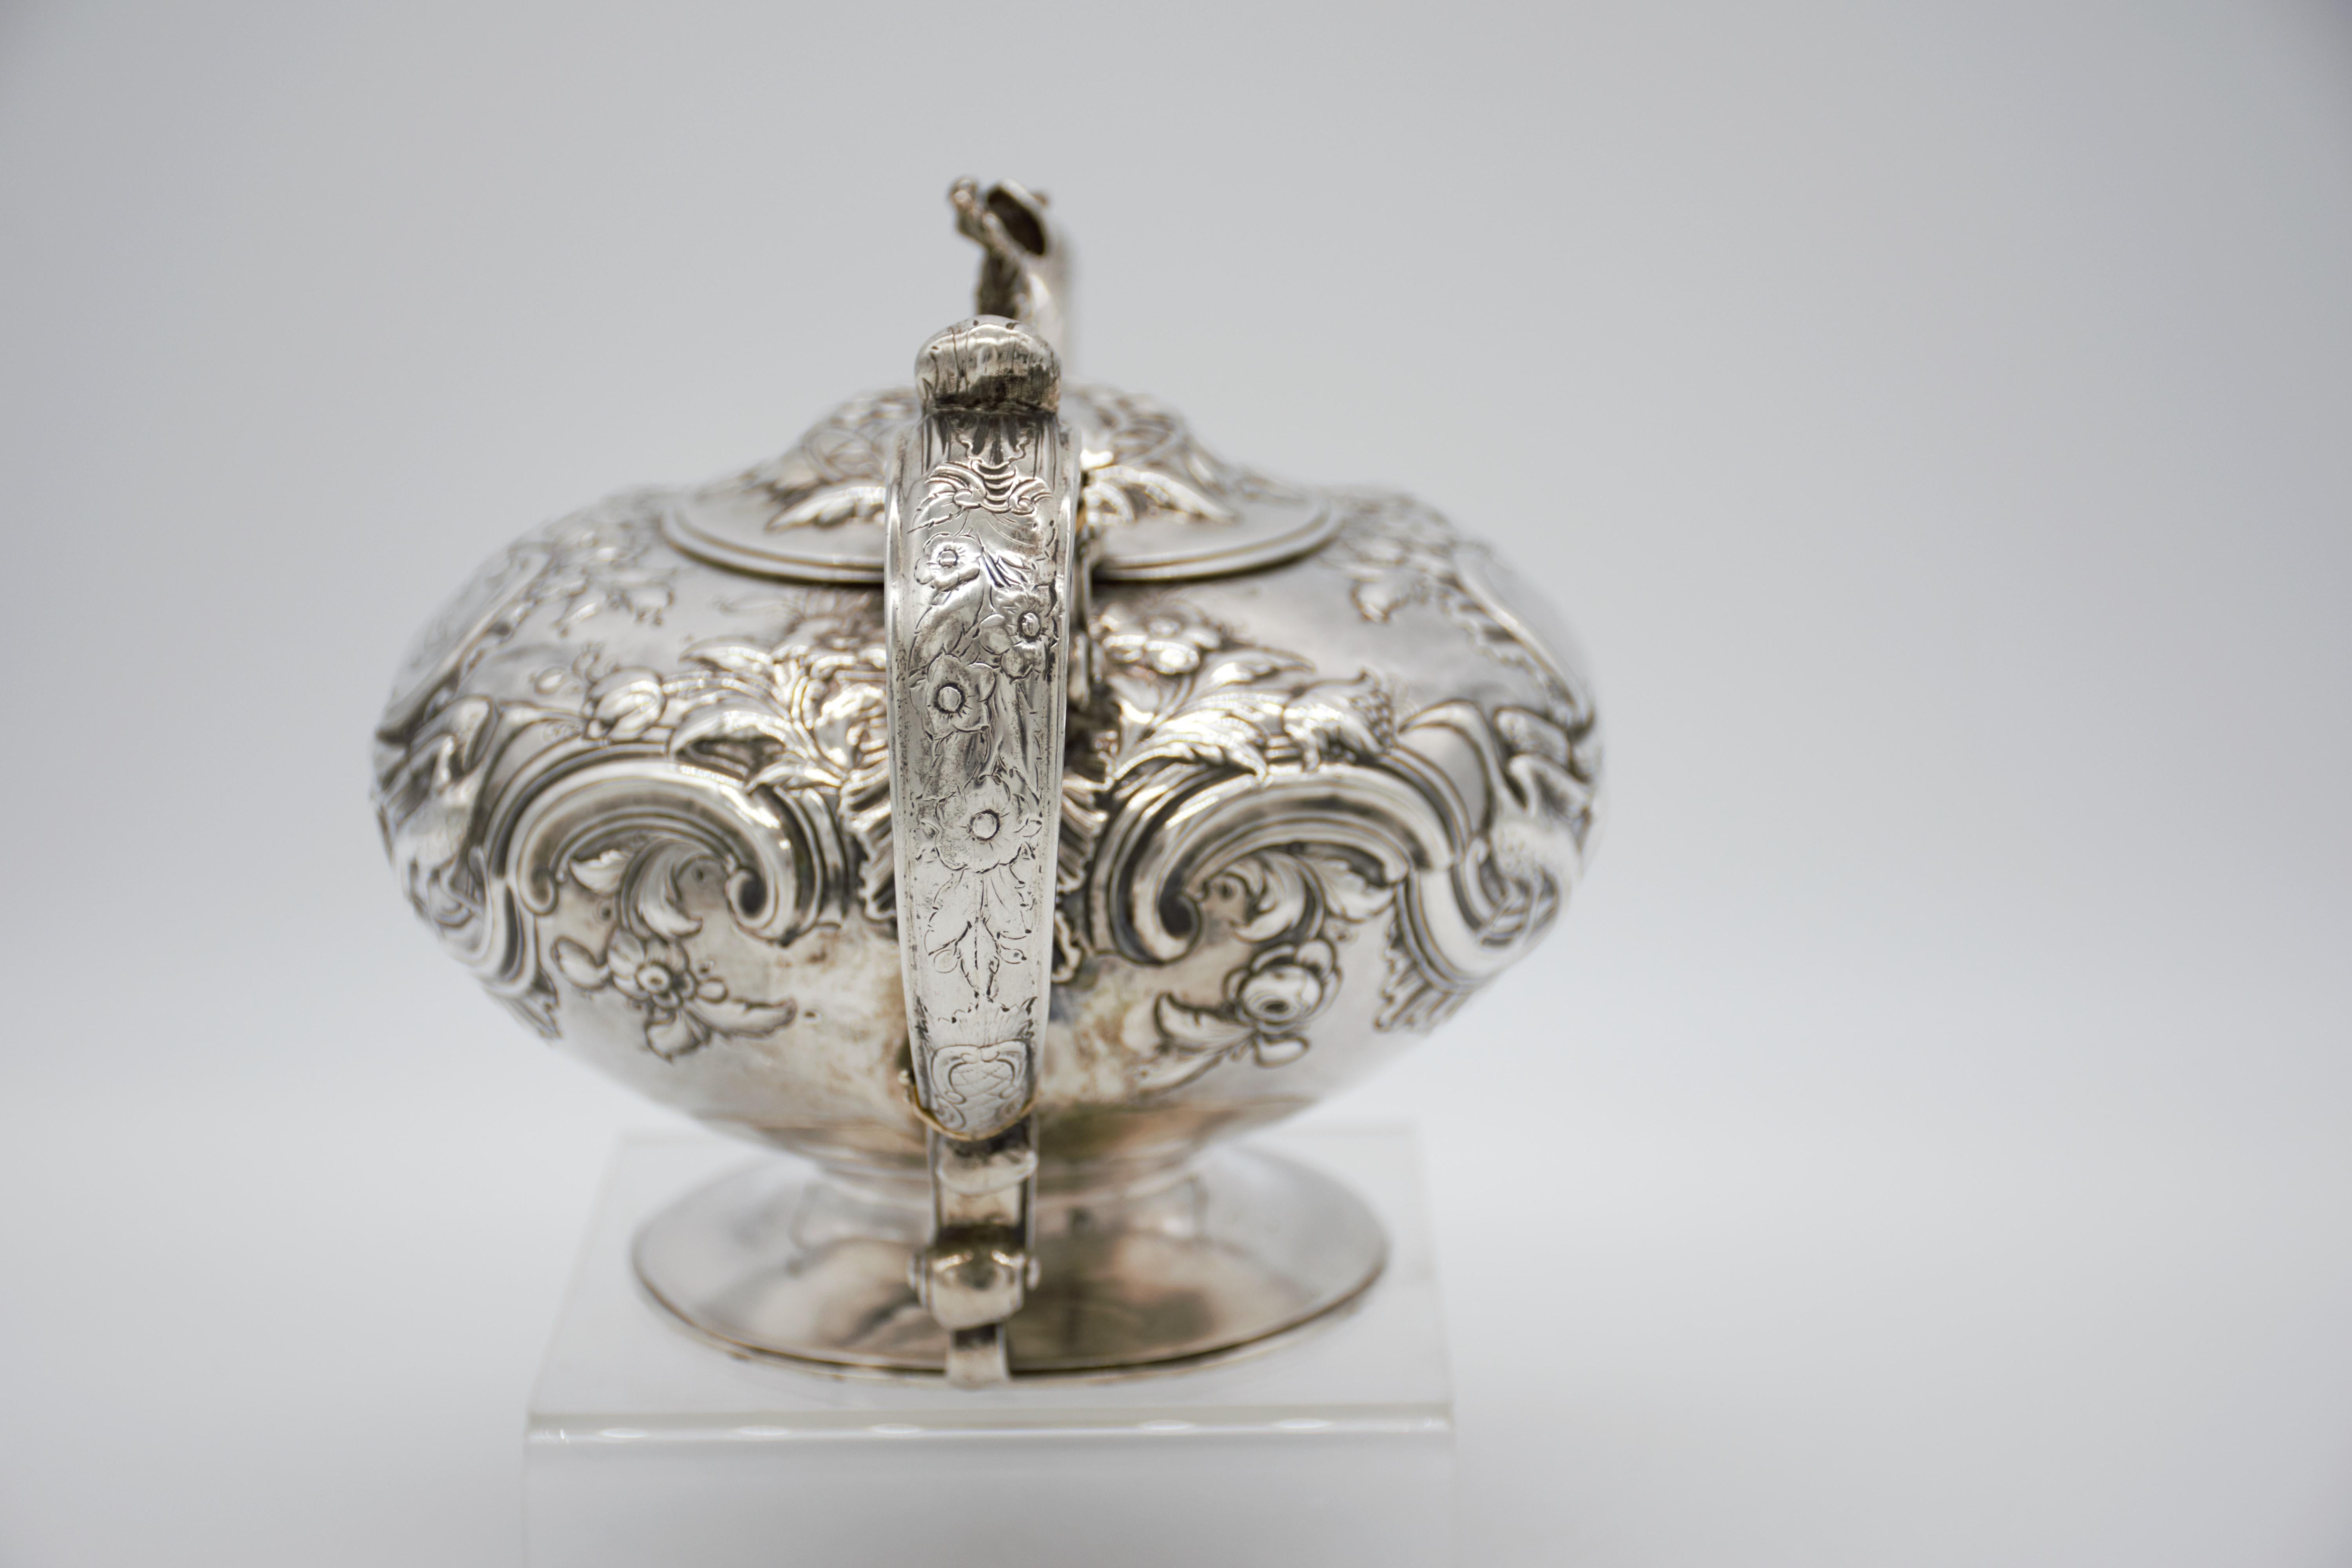 Neoclassical exceptional George III teapot by preeminent silversmith Paul Storr, 1793 For Sale